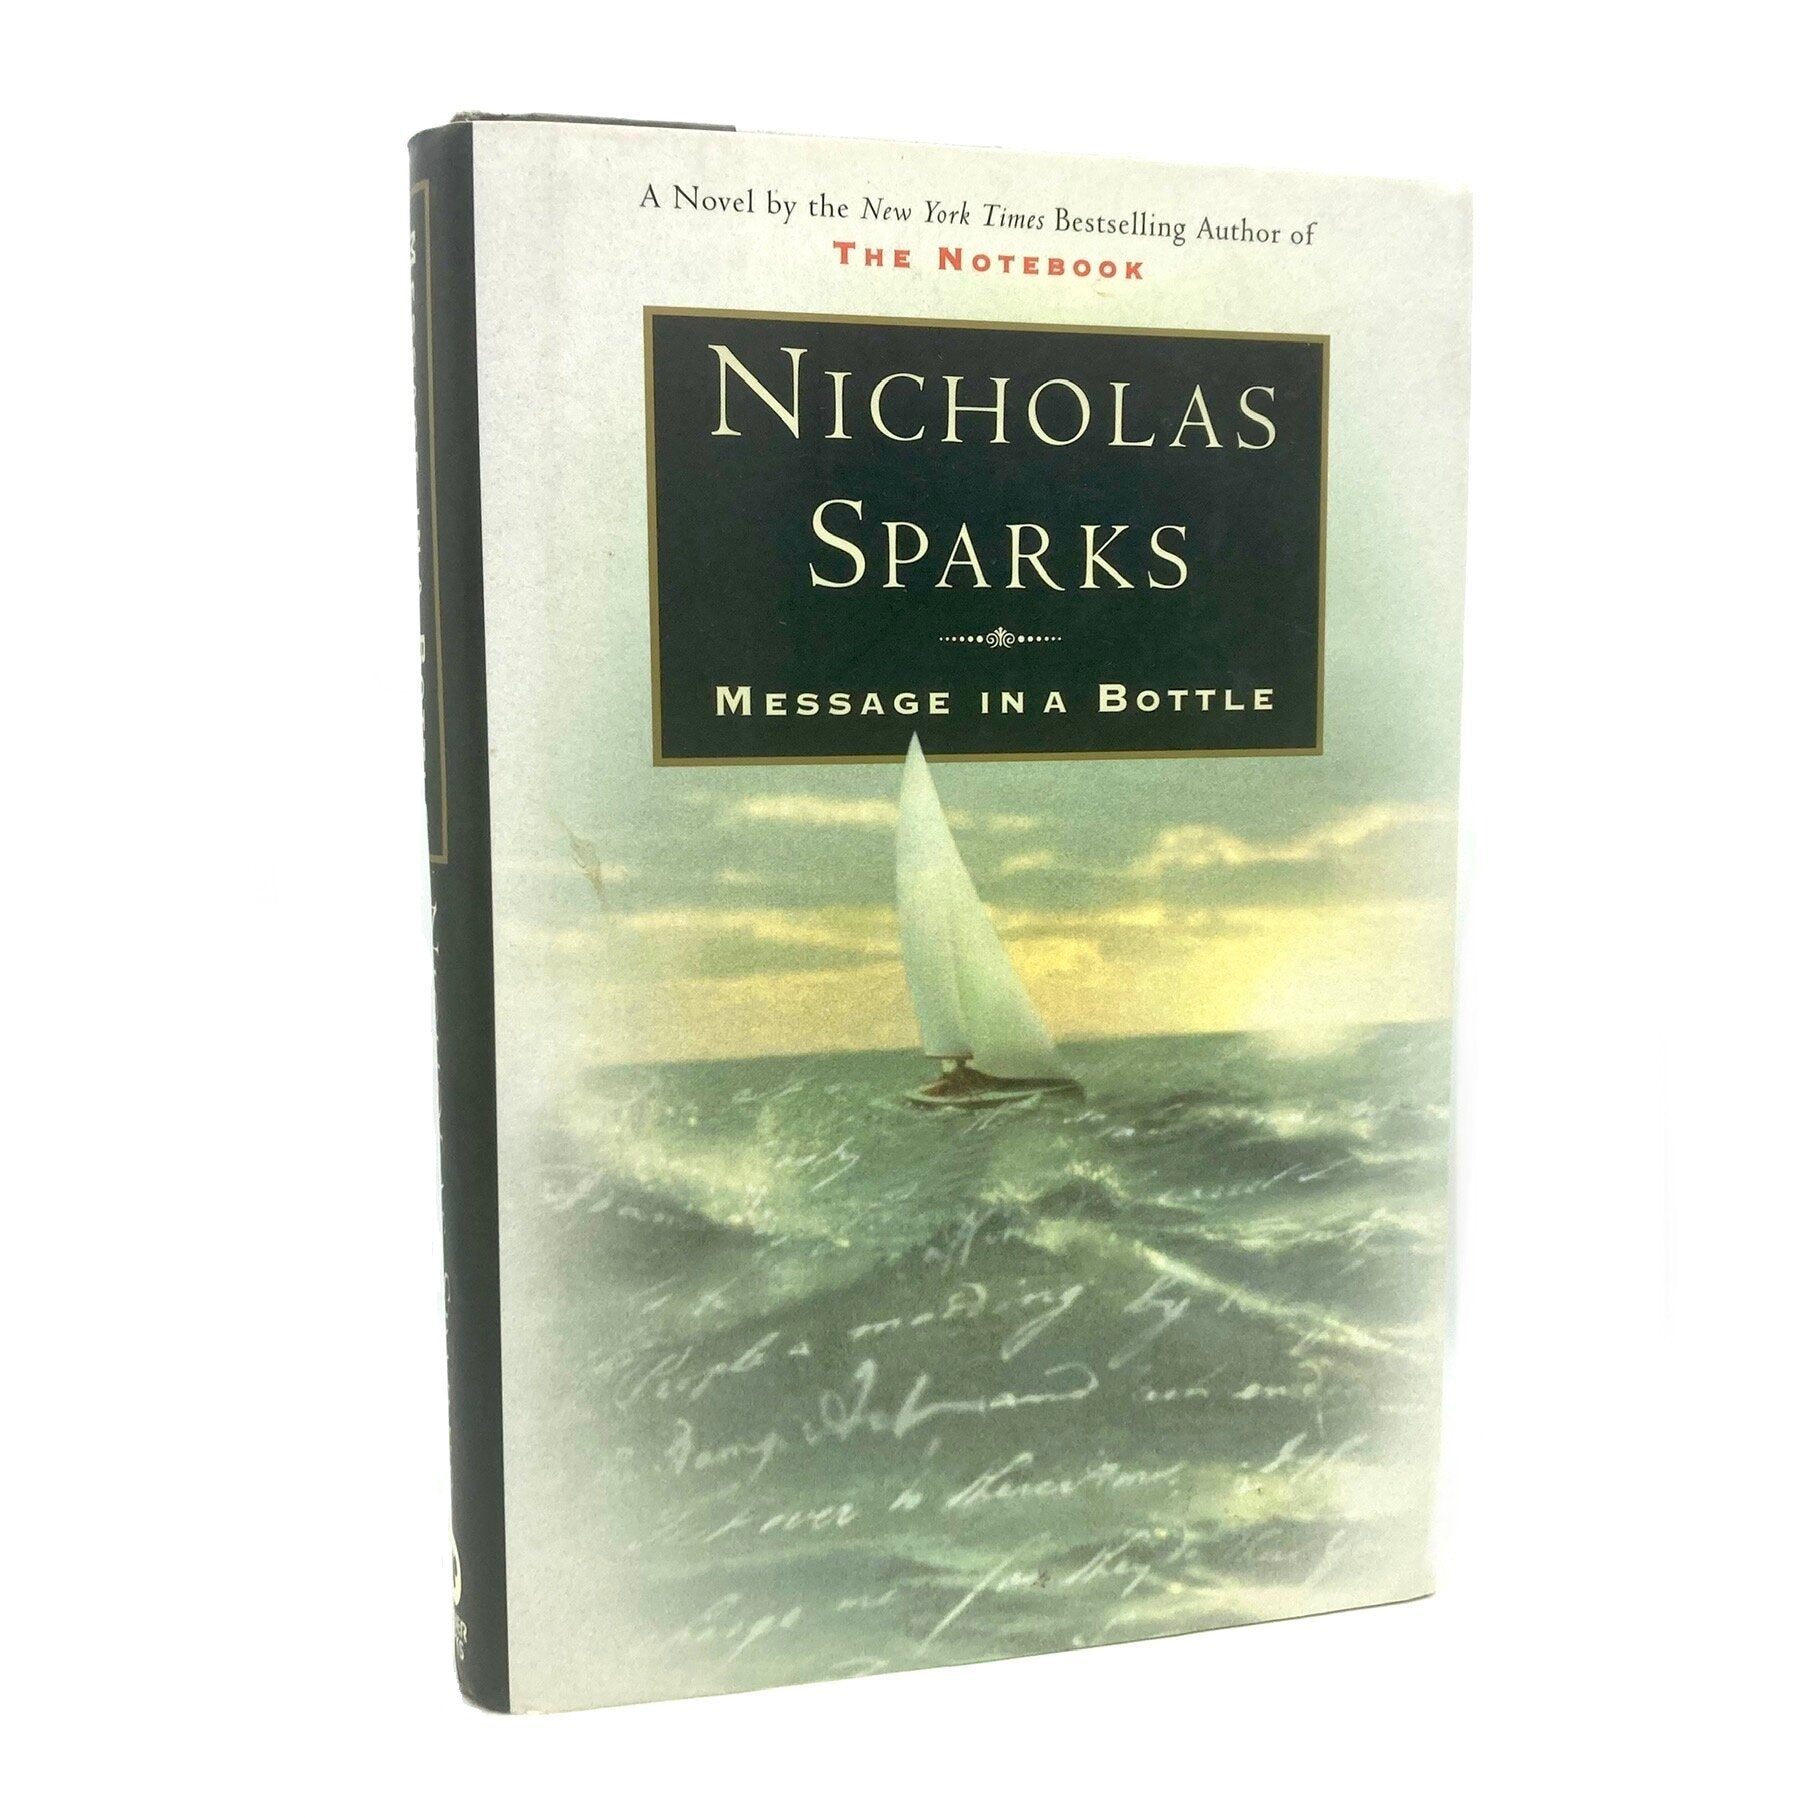 SPARKS, Nicholas "Message in a Bottle" [Warner, 1998] 1st Edition (Signed) - Buzz Bookstore